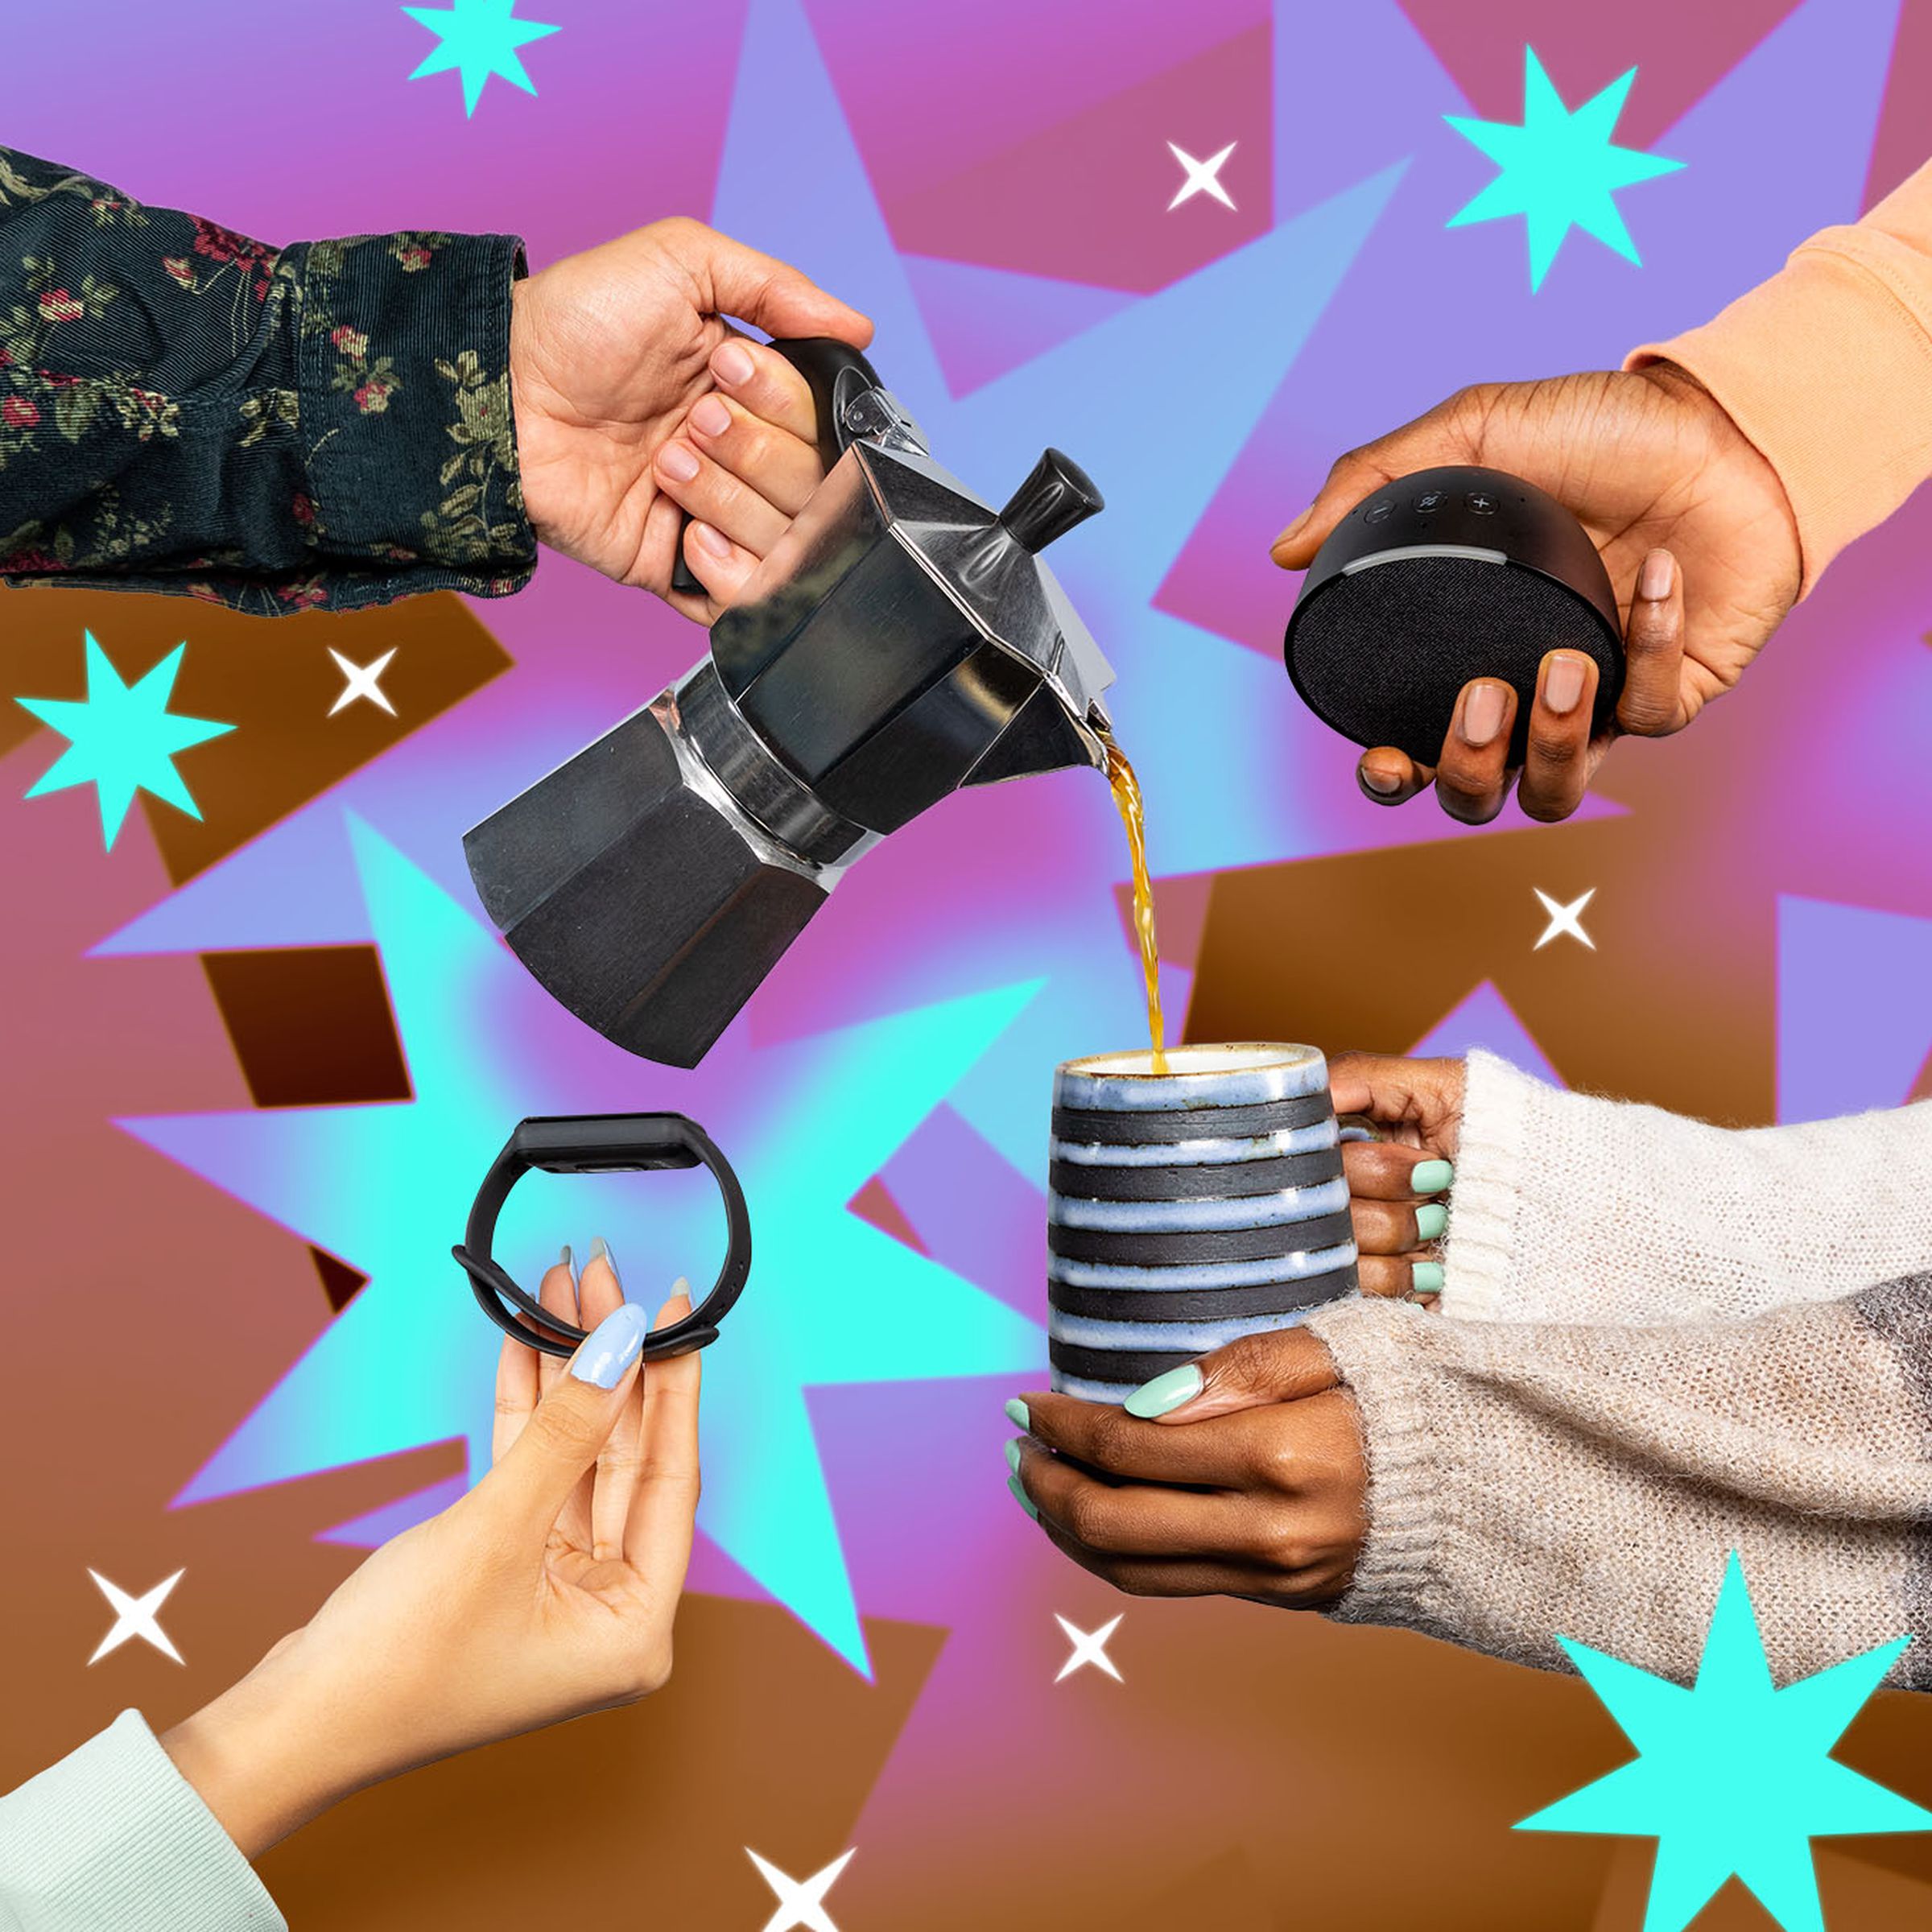 Photo illustration of hands holding various products on a brightly colored background of stars.